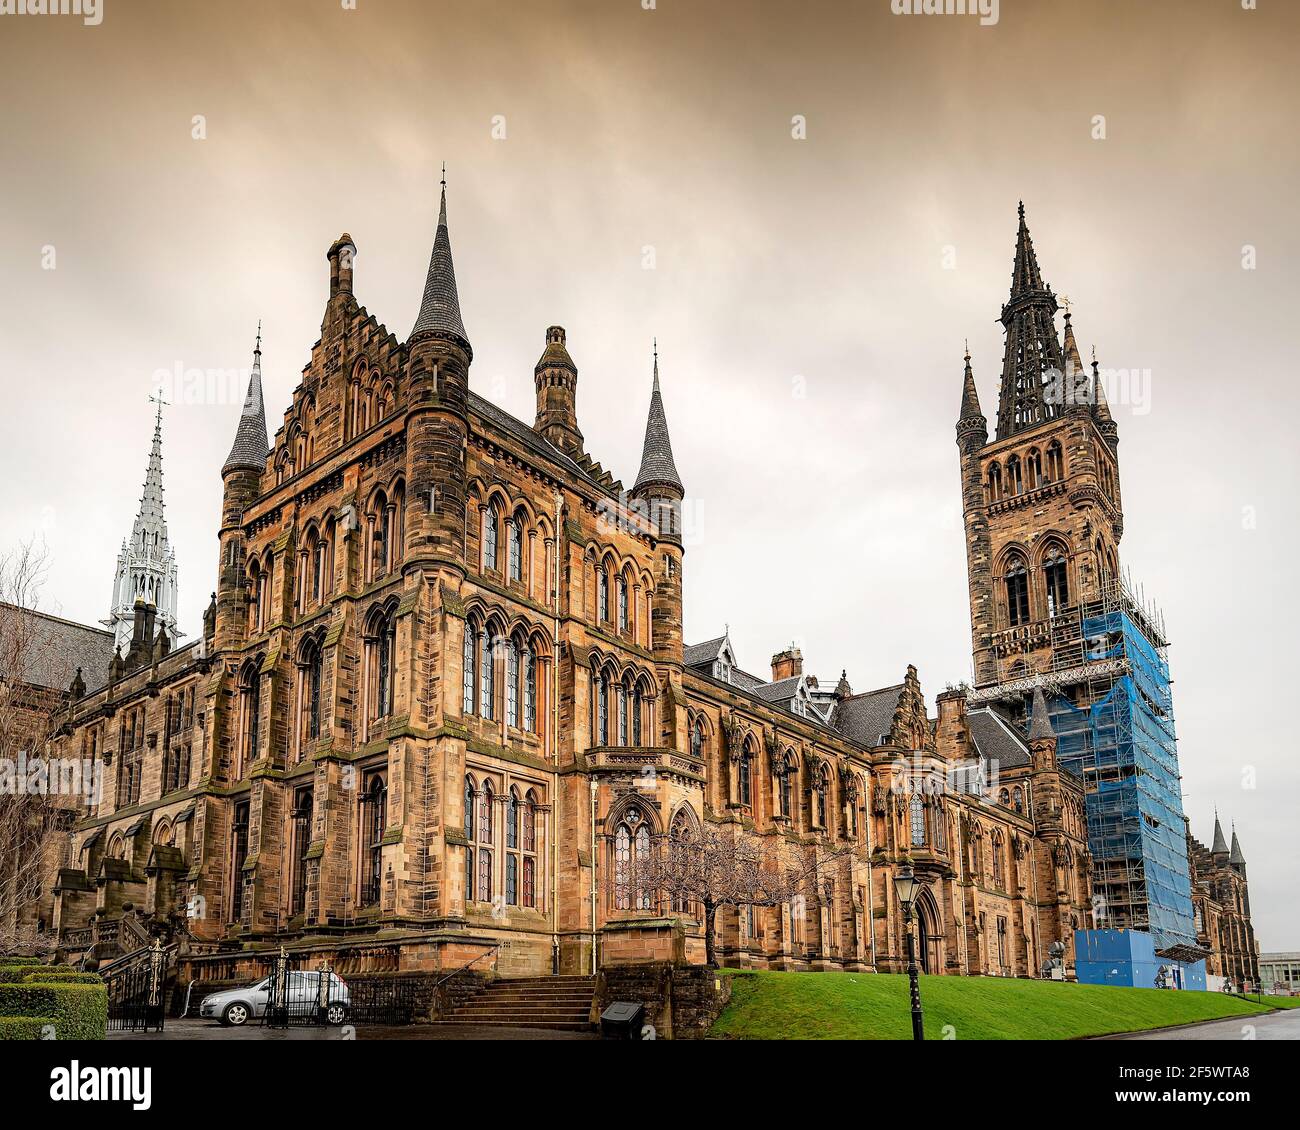 GLASGOW, SCOTLAND - APRIL 03, 2016: Several  locations within the university were used as a filming location for the popular TV show, Outlander. Stock Photo